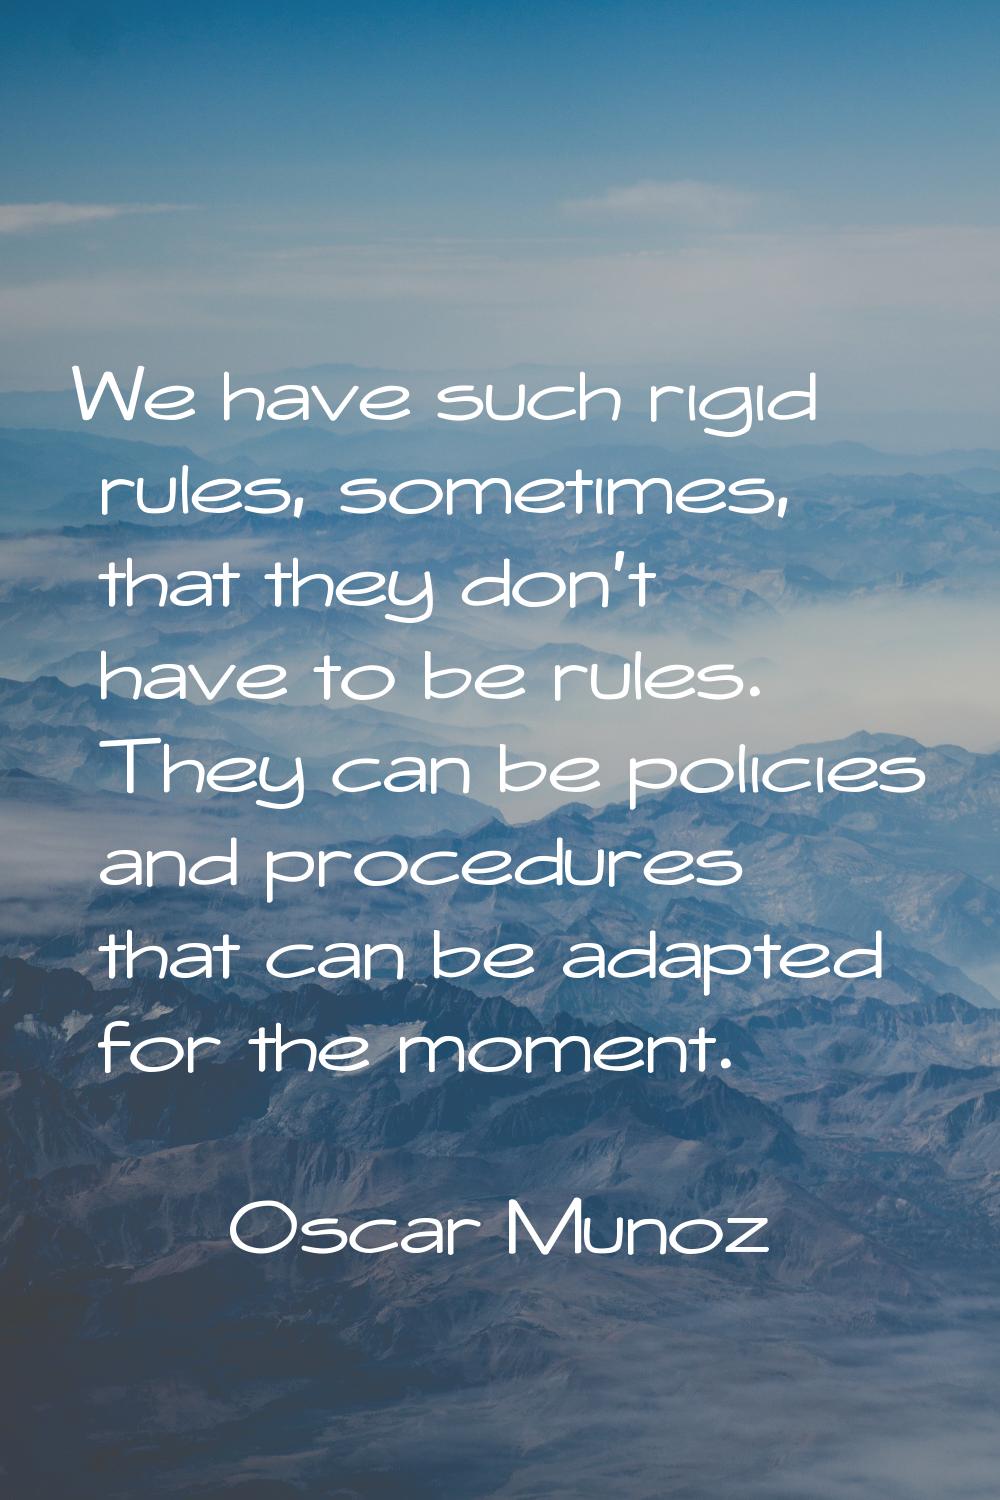 We have such rigid rules, sometimes, that they don't have to be rules. They can be policies and pro